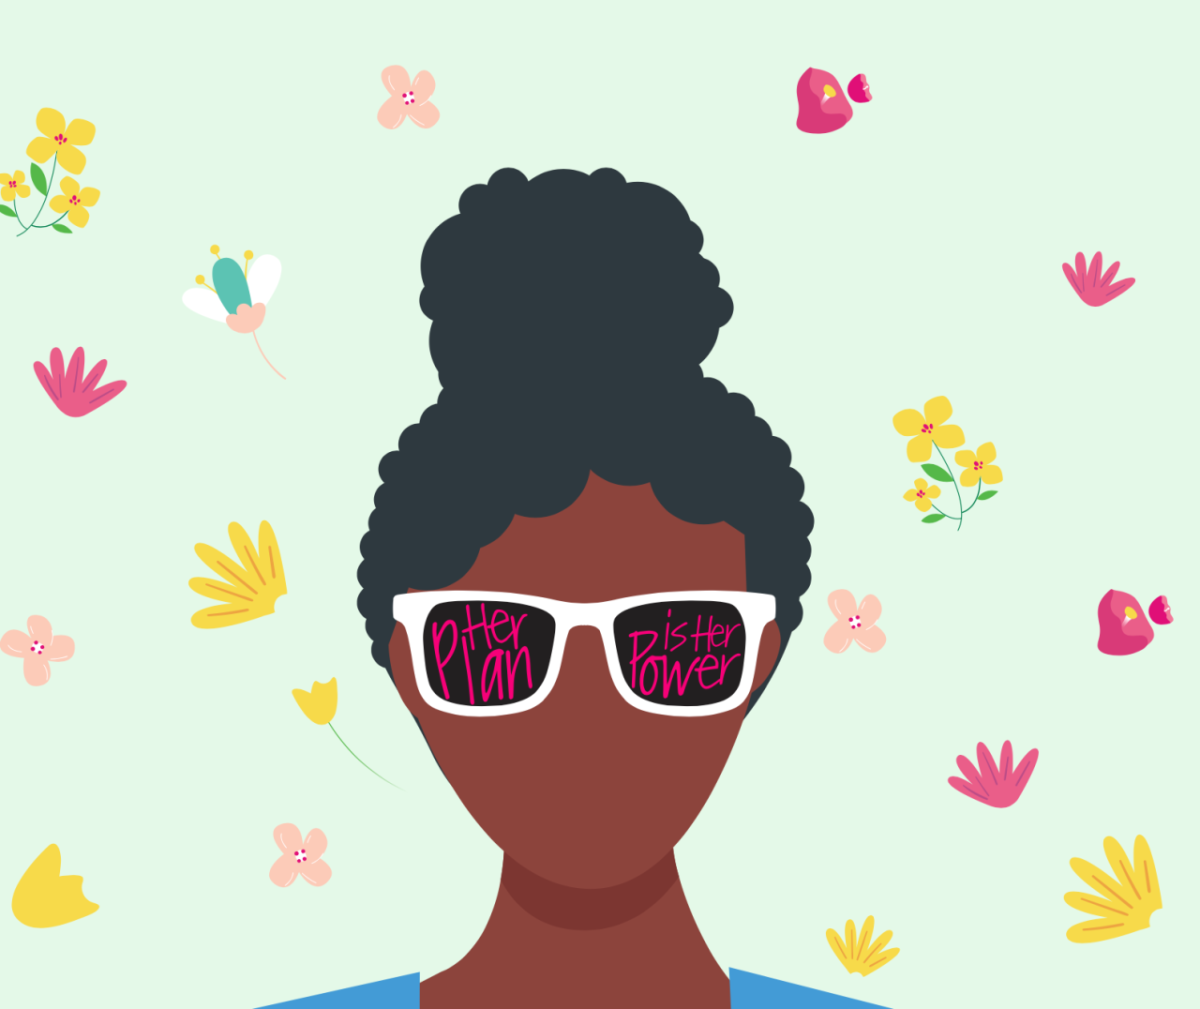 Illustration of a woman wearing glasses with the text "Her Plan Is Her Power" in the lenses of the glasses